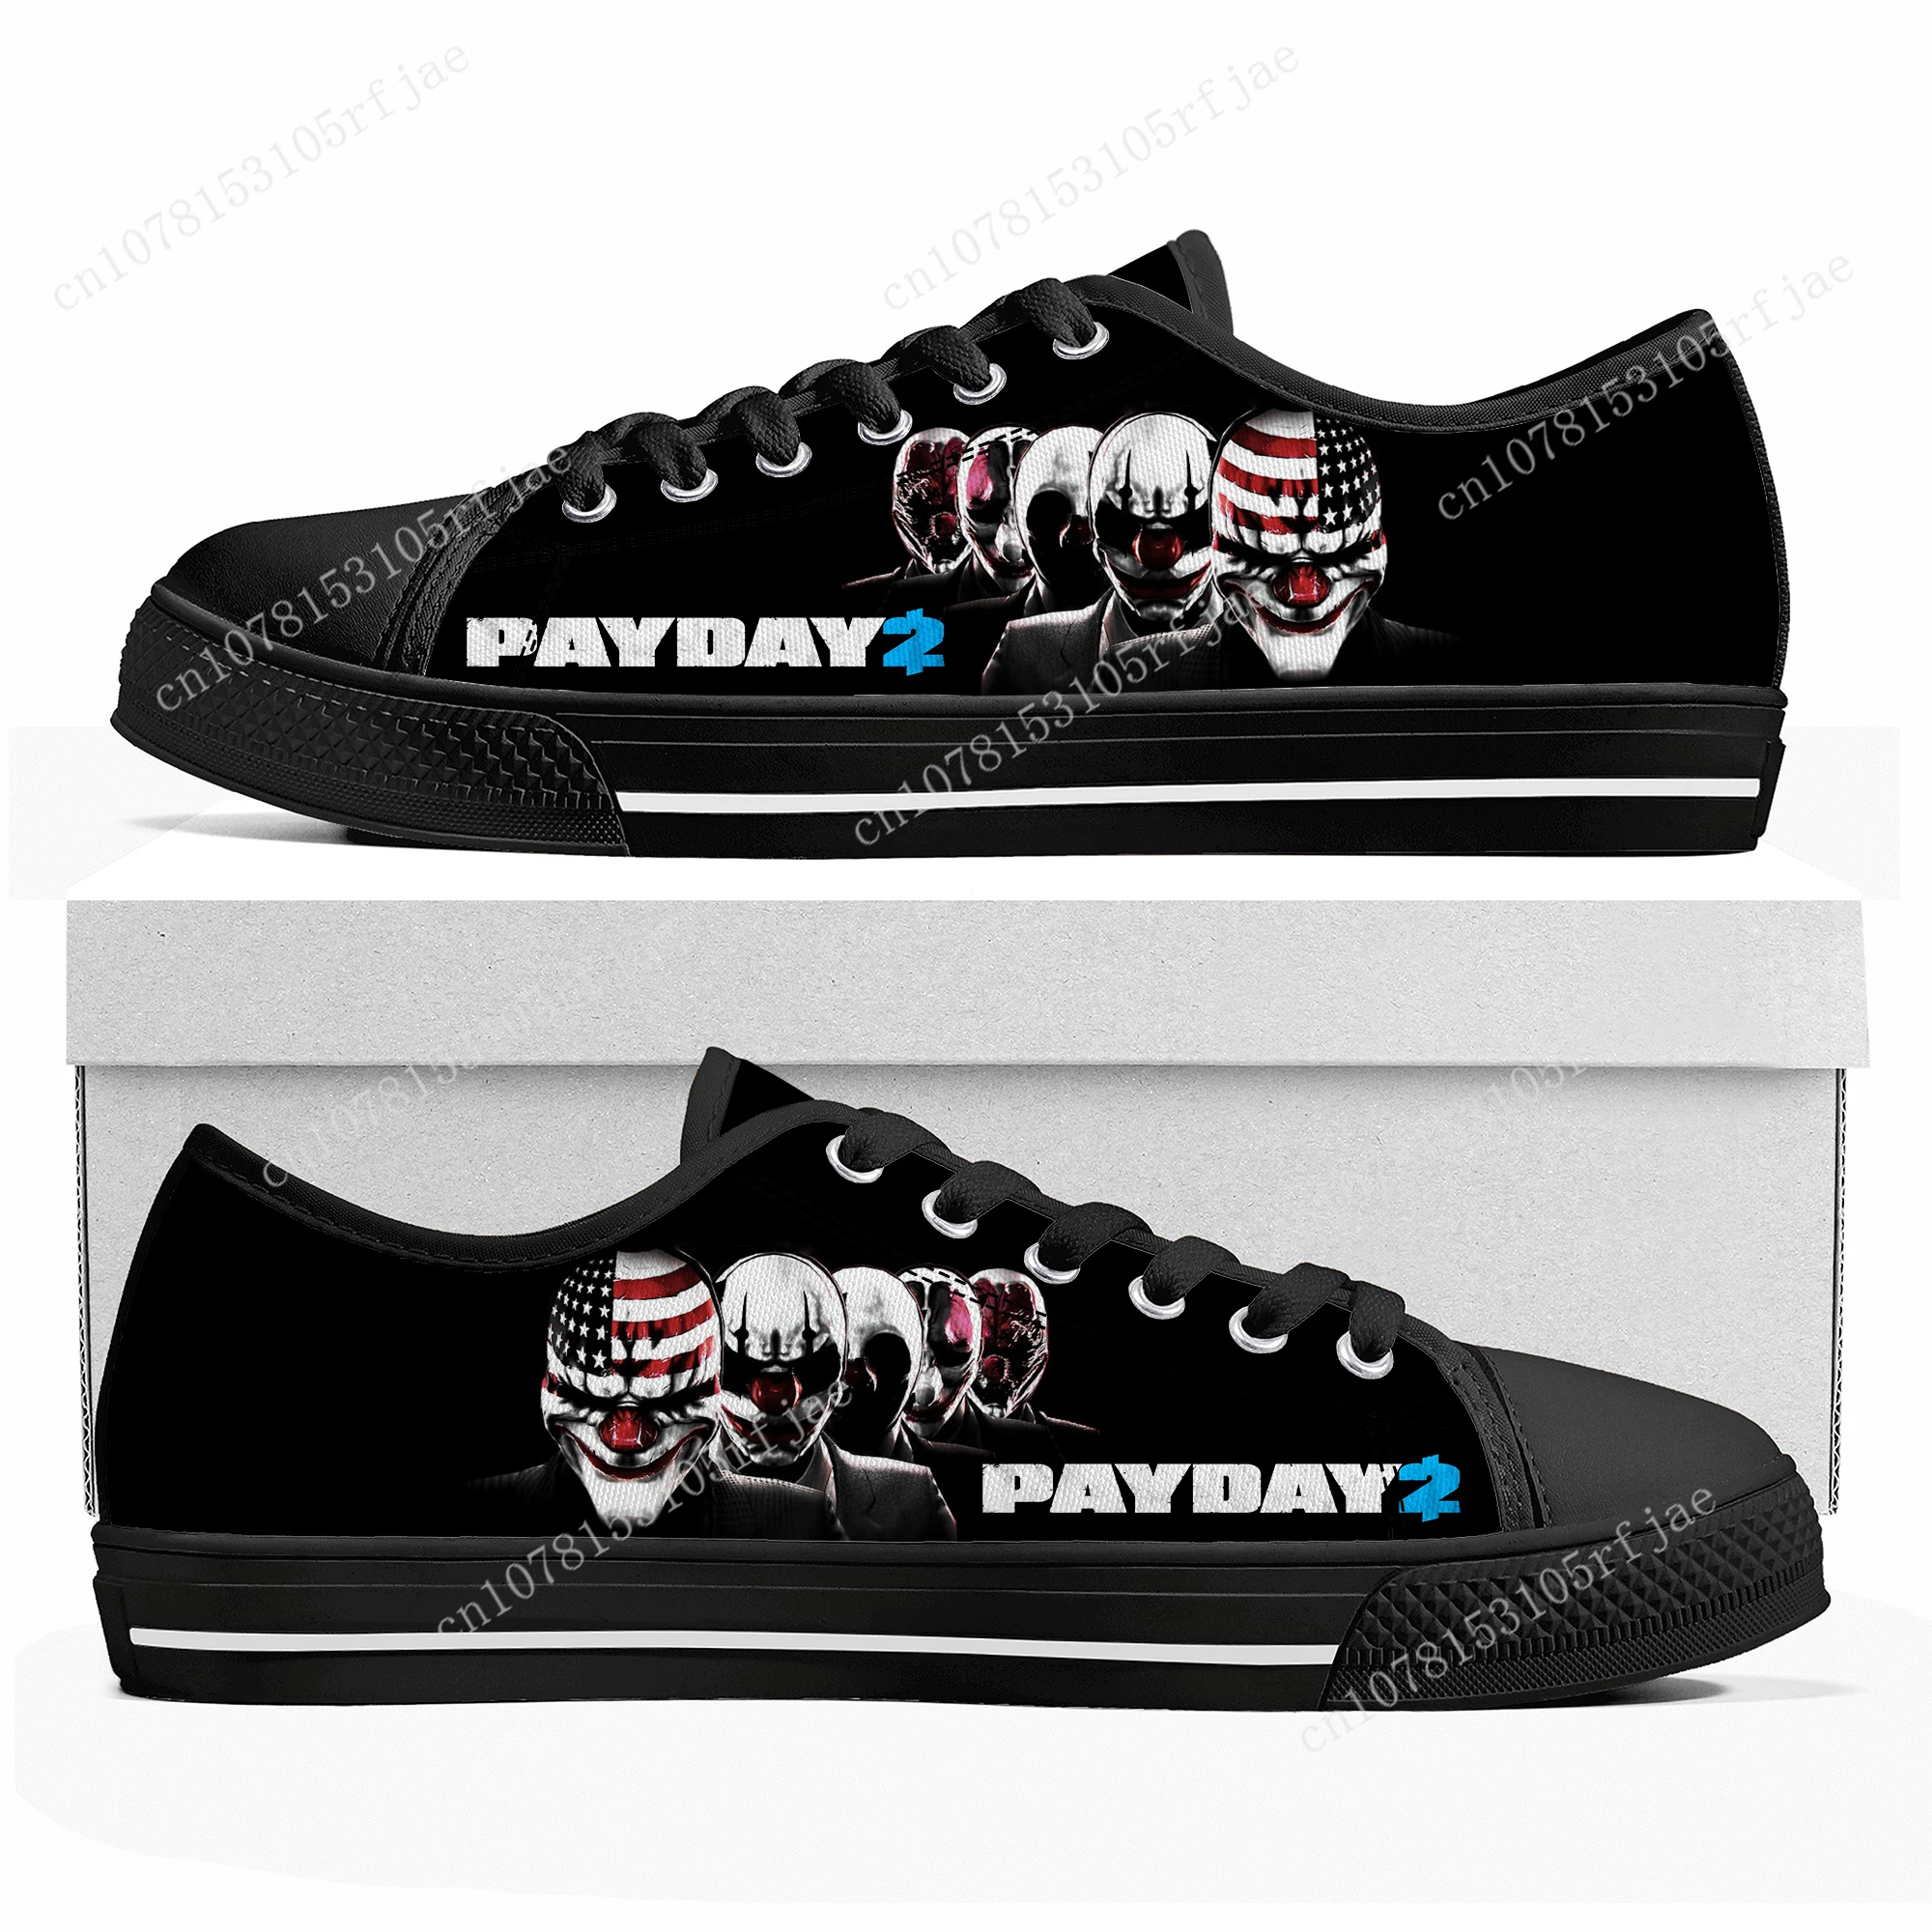 

PAYDAY 2 Custom Low Top Sneakers Cartoon Game Womens Mens Teenager High Quality Shoes Casual Fashion Tailor Made Canvas Sneaker